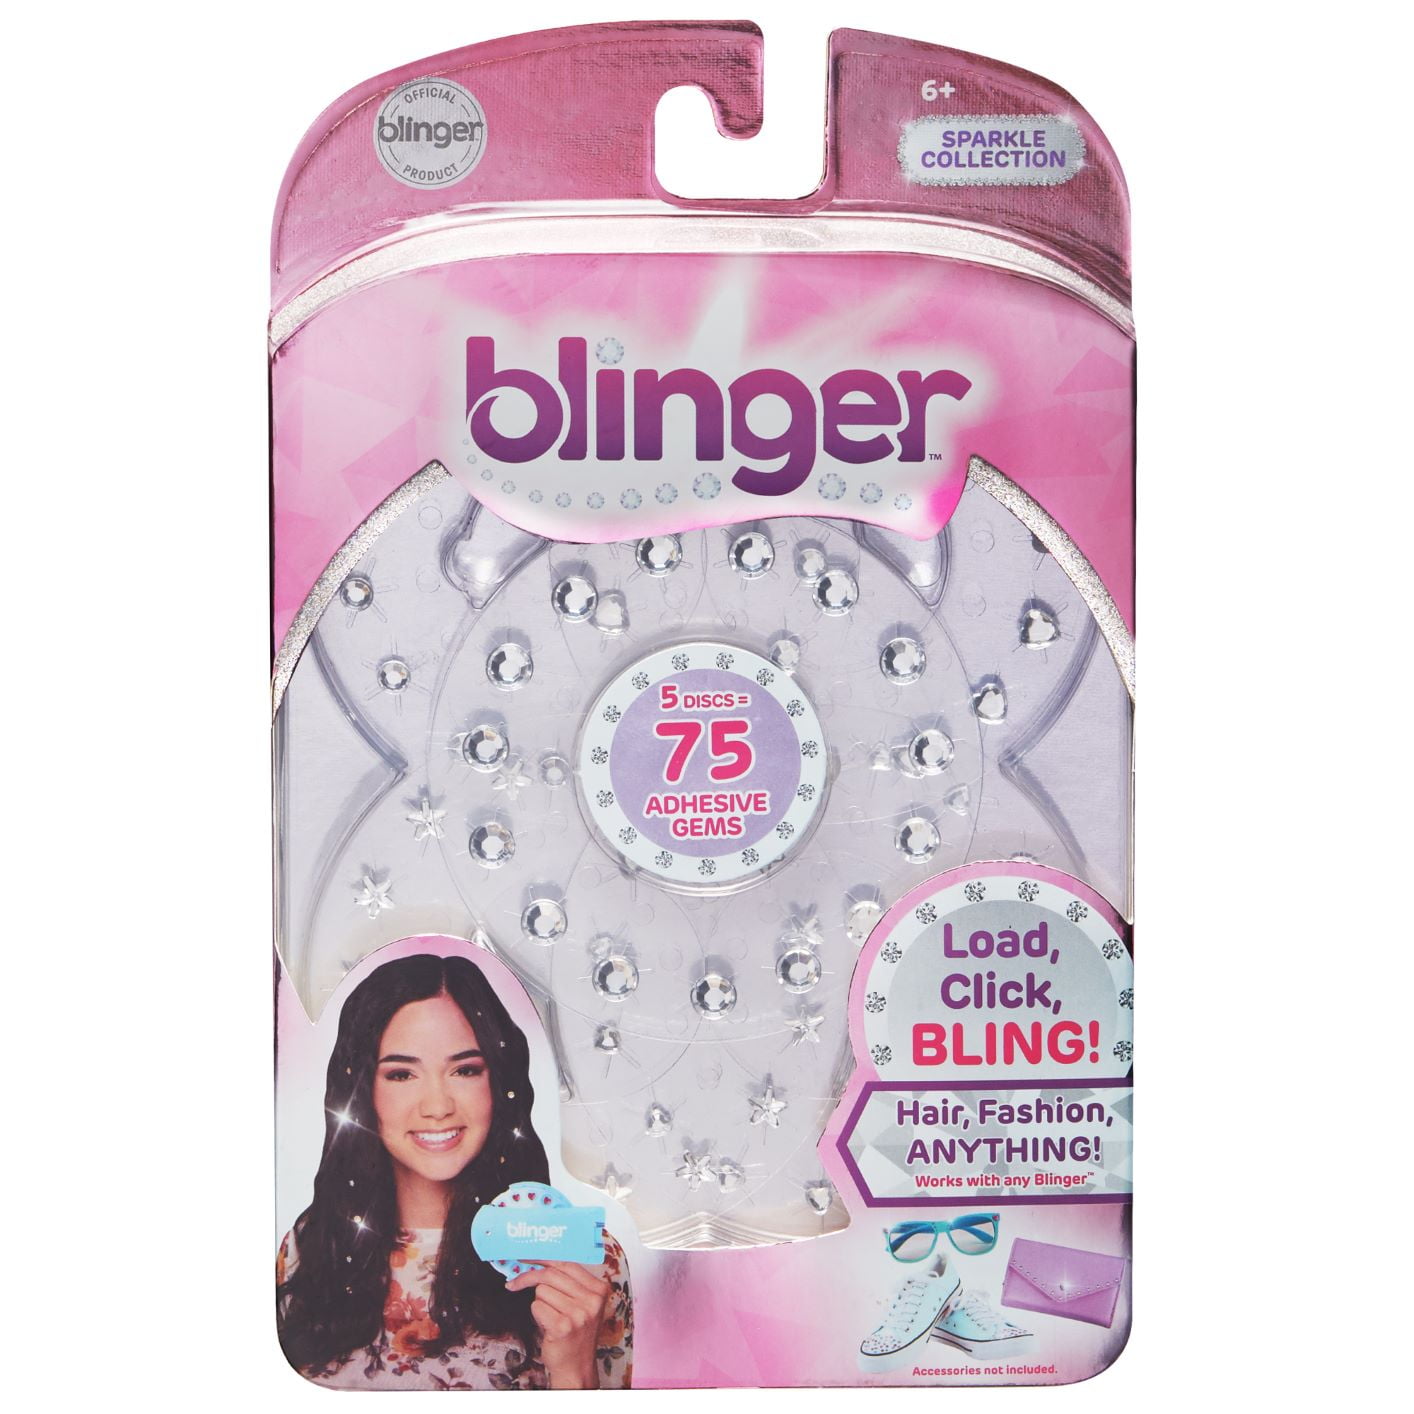 Blinger 5 Piece Refill Pack - Sparkle Collection Brilliance Pack